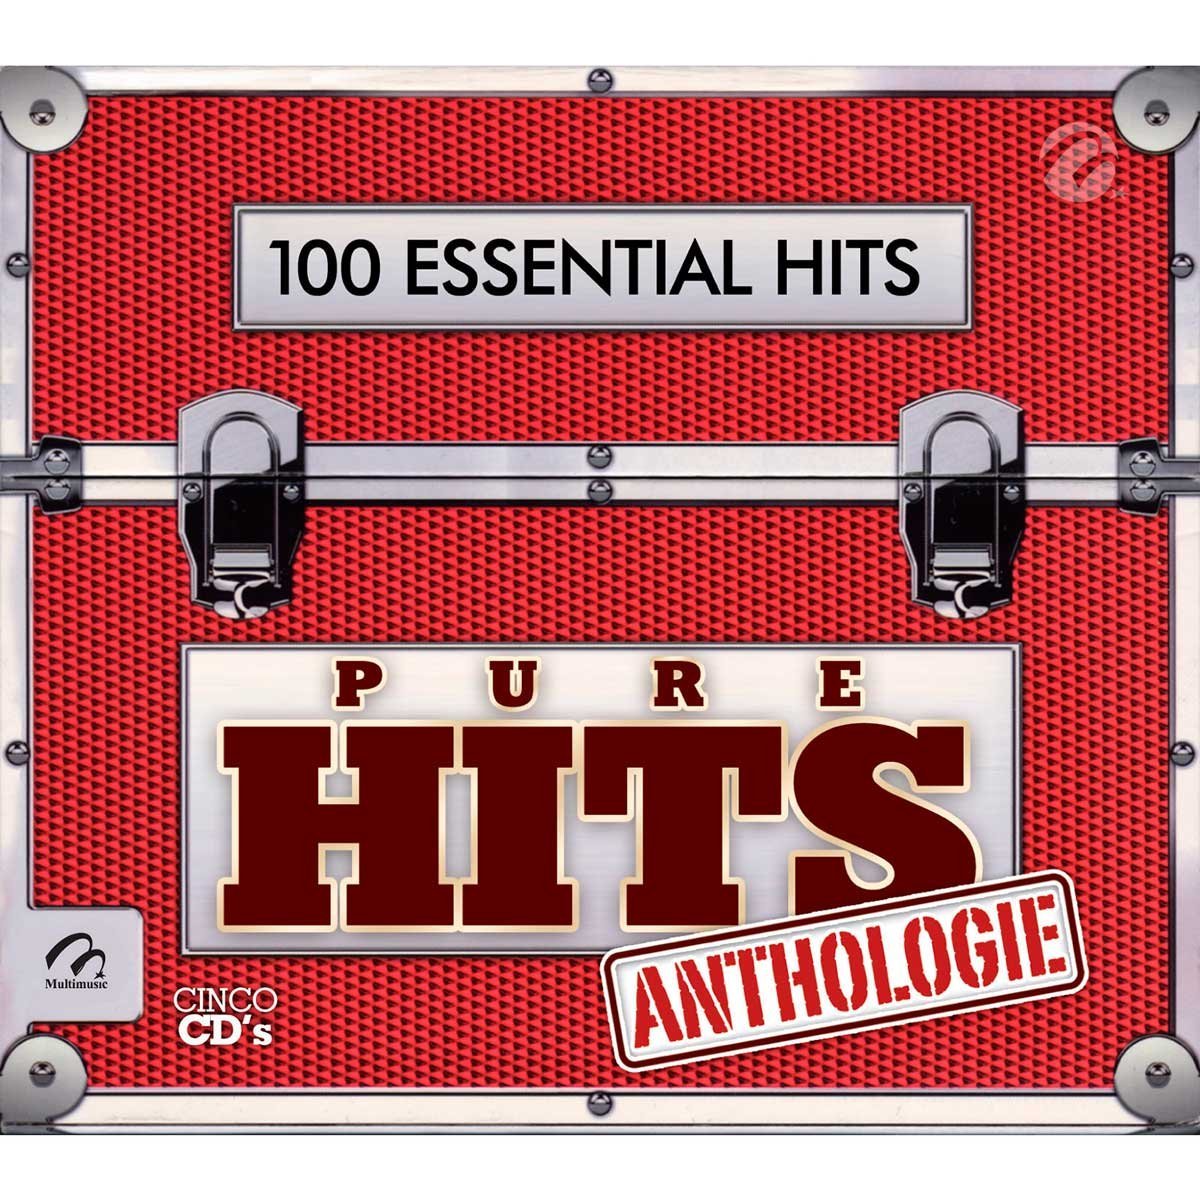 5 Cds 100 Essential Hits Pure Hits Anthologie